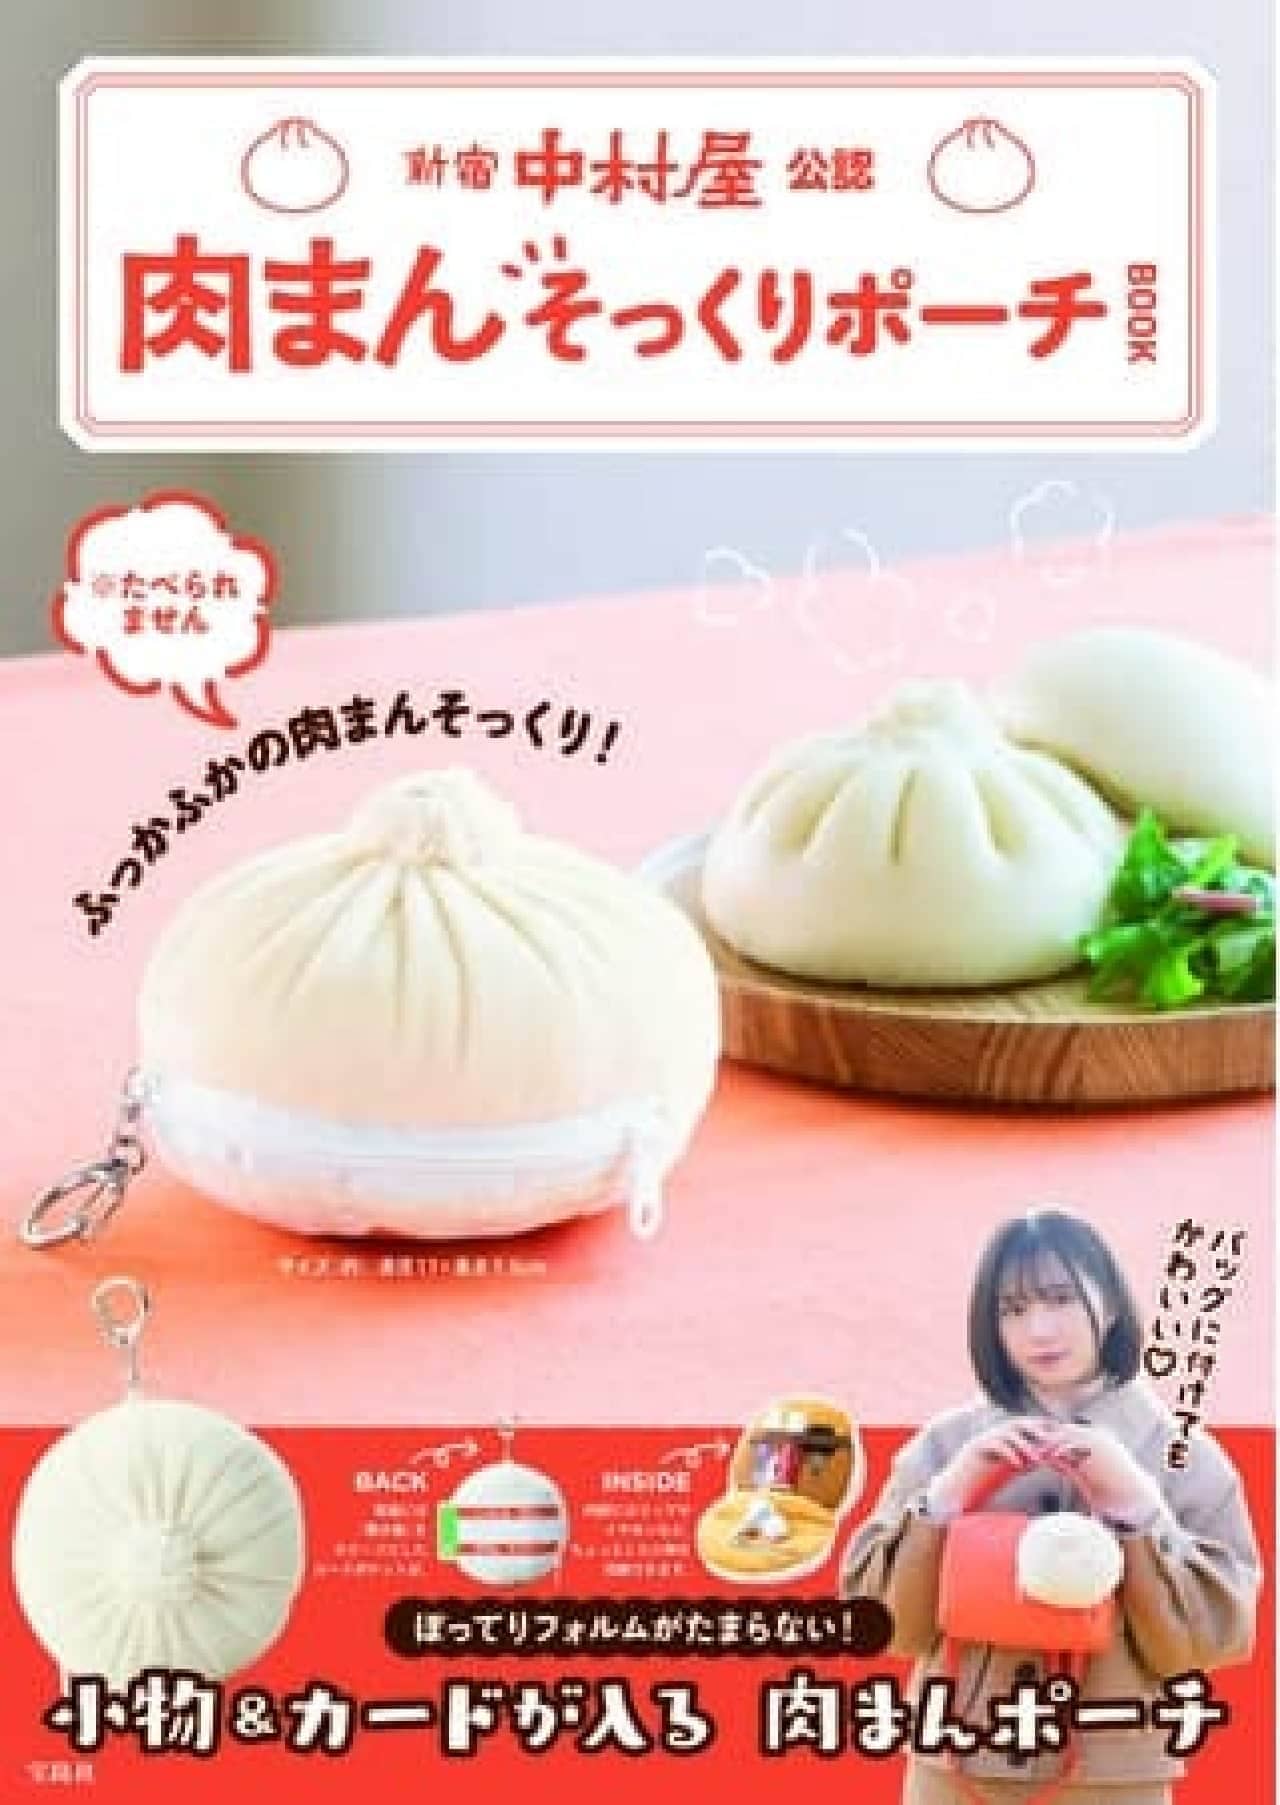 Shinjuku Nakamura-ya's Official Nikuman Look-alike Pouch Book" at Seven-Eleven and other stores -- A book full of Chinese buns! Comes with a soft and fluffy pouch!